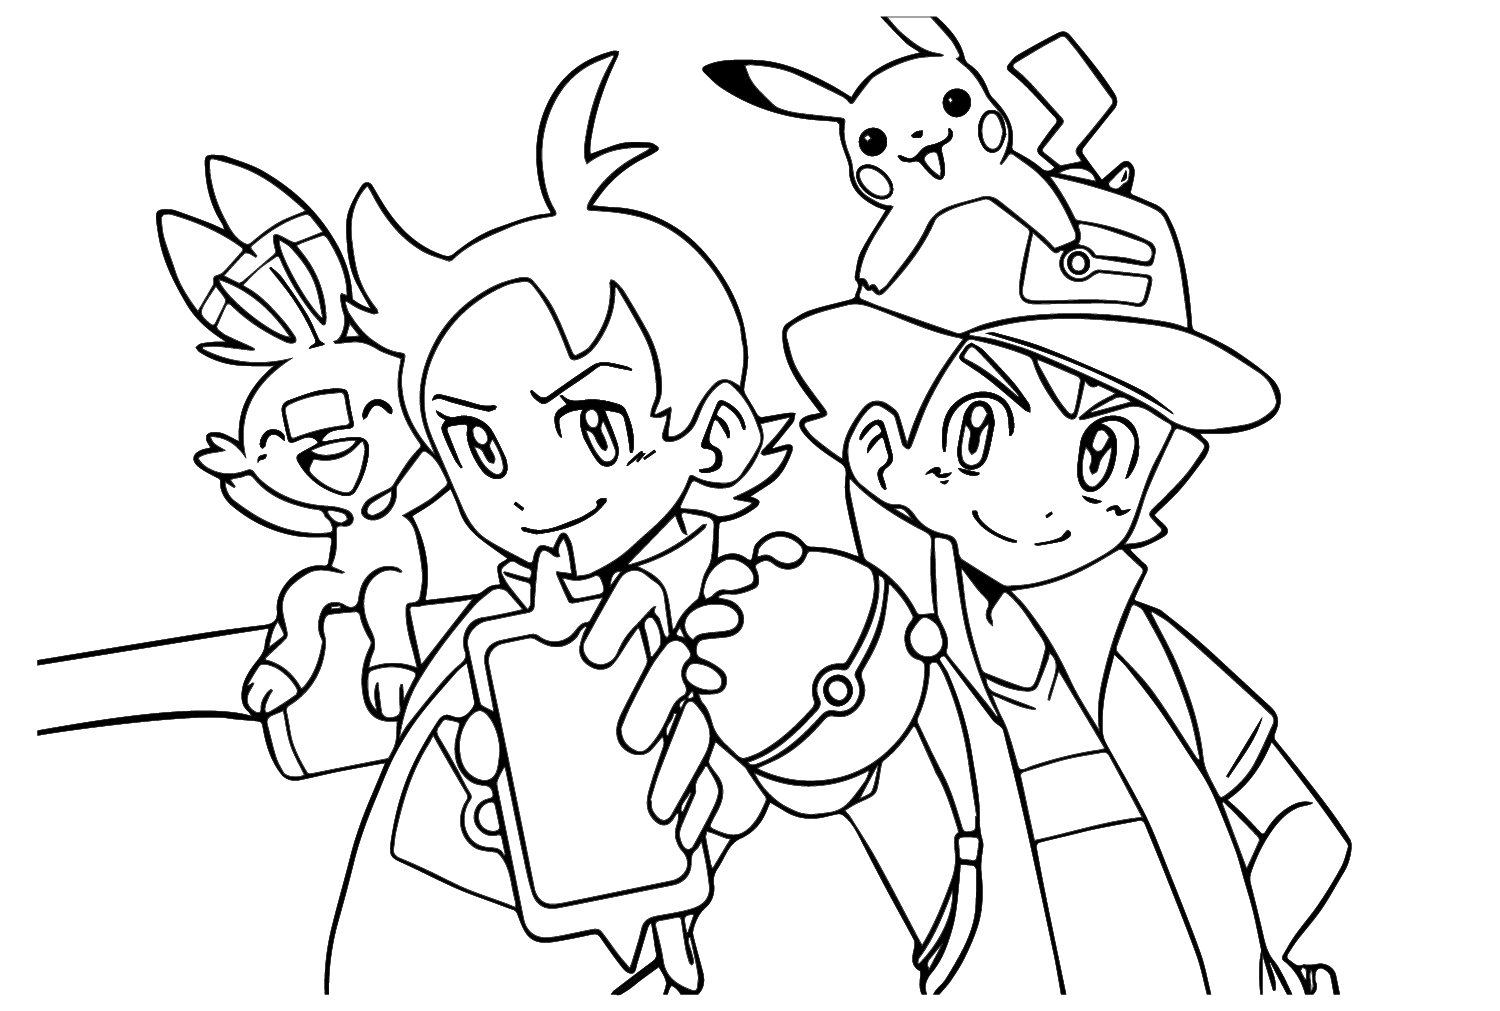 Coloring Ash Ketchum - Ash Ketchum Coloring Pages - Coloring Pages For ...